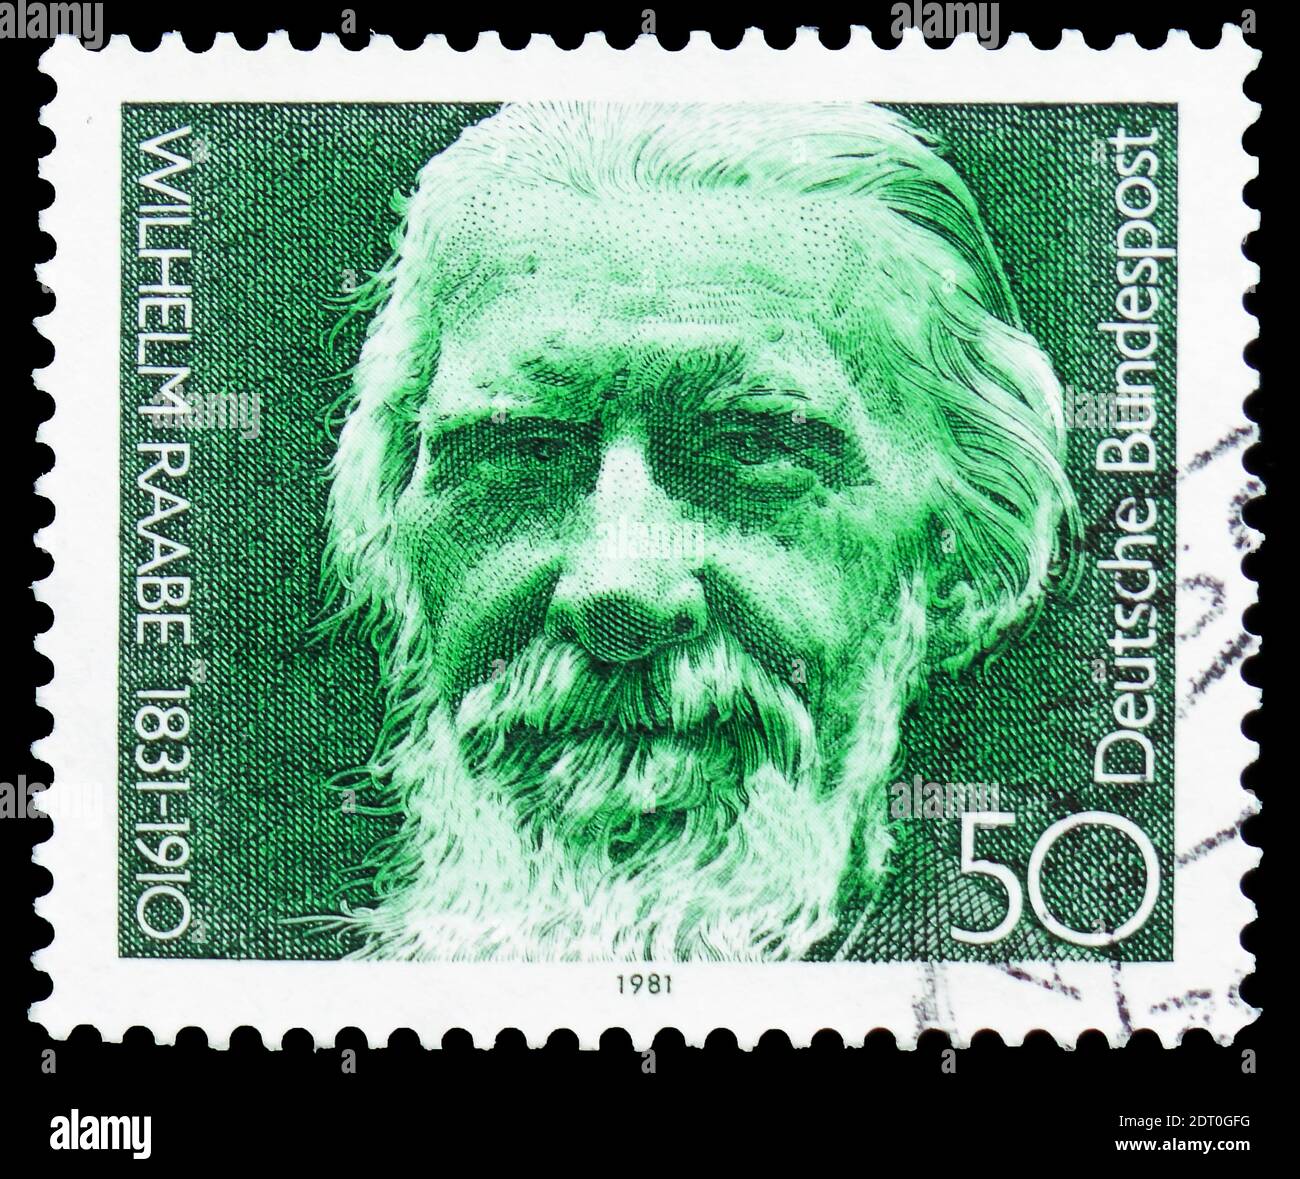 MOSCOW, RUSSIA - FEBRUARY 21, 2019: A stamp printed in Germany, Federal Republic shows Wilhelm Raabe (1831-1910), poet, serie, circa 1981 Stock Photo